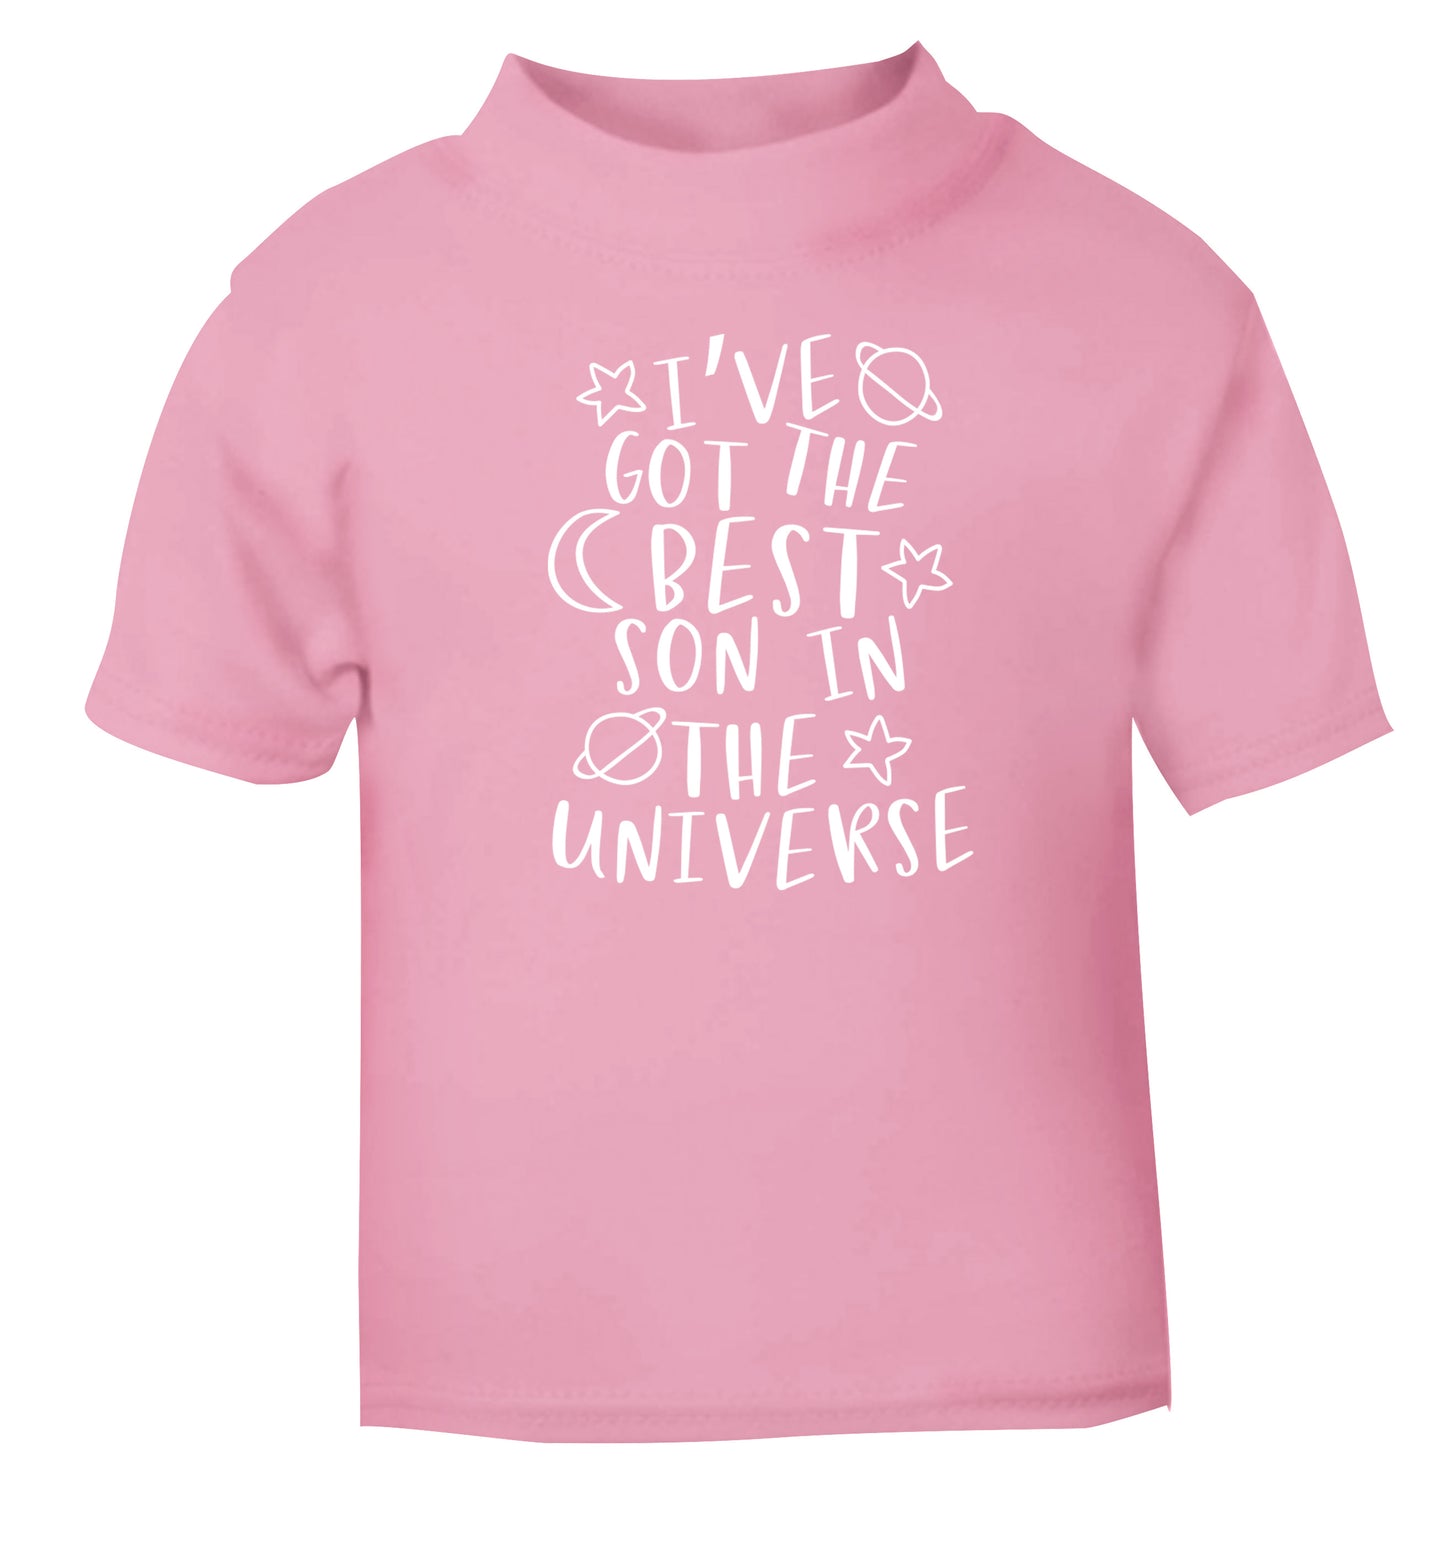 I've got the best son in the universe light pink Baby Toddler Tshirt 2 Years